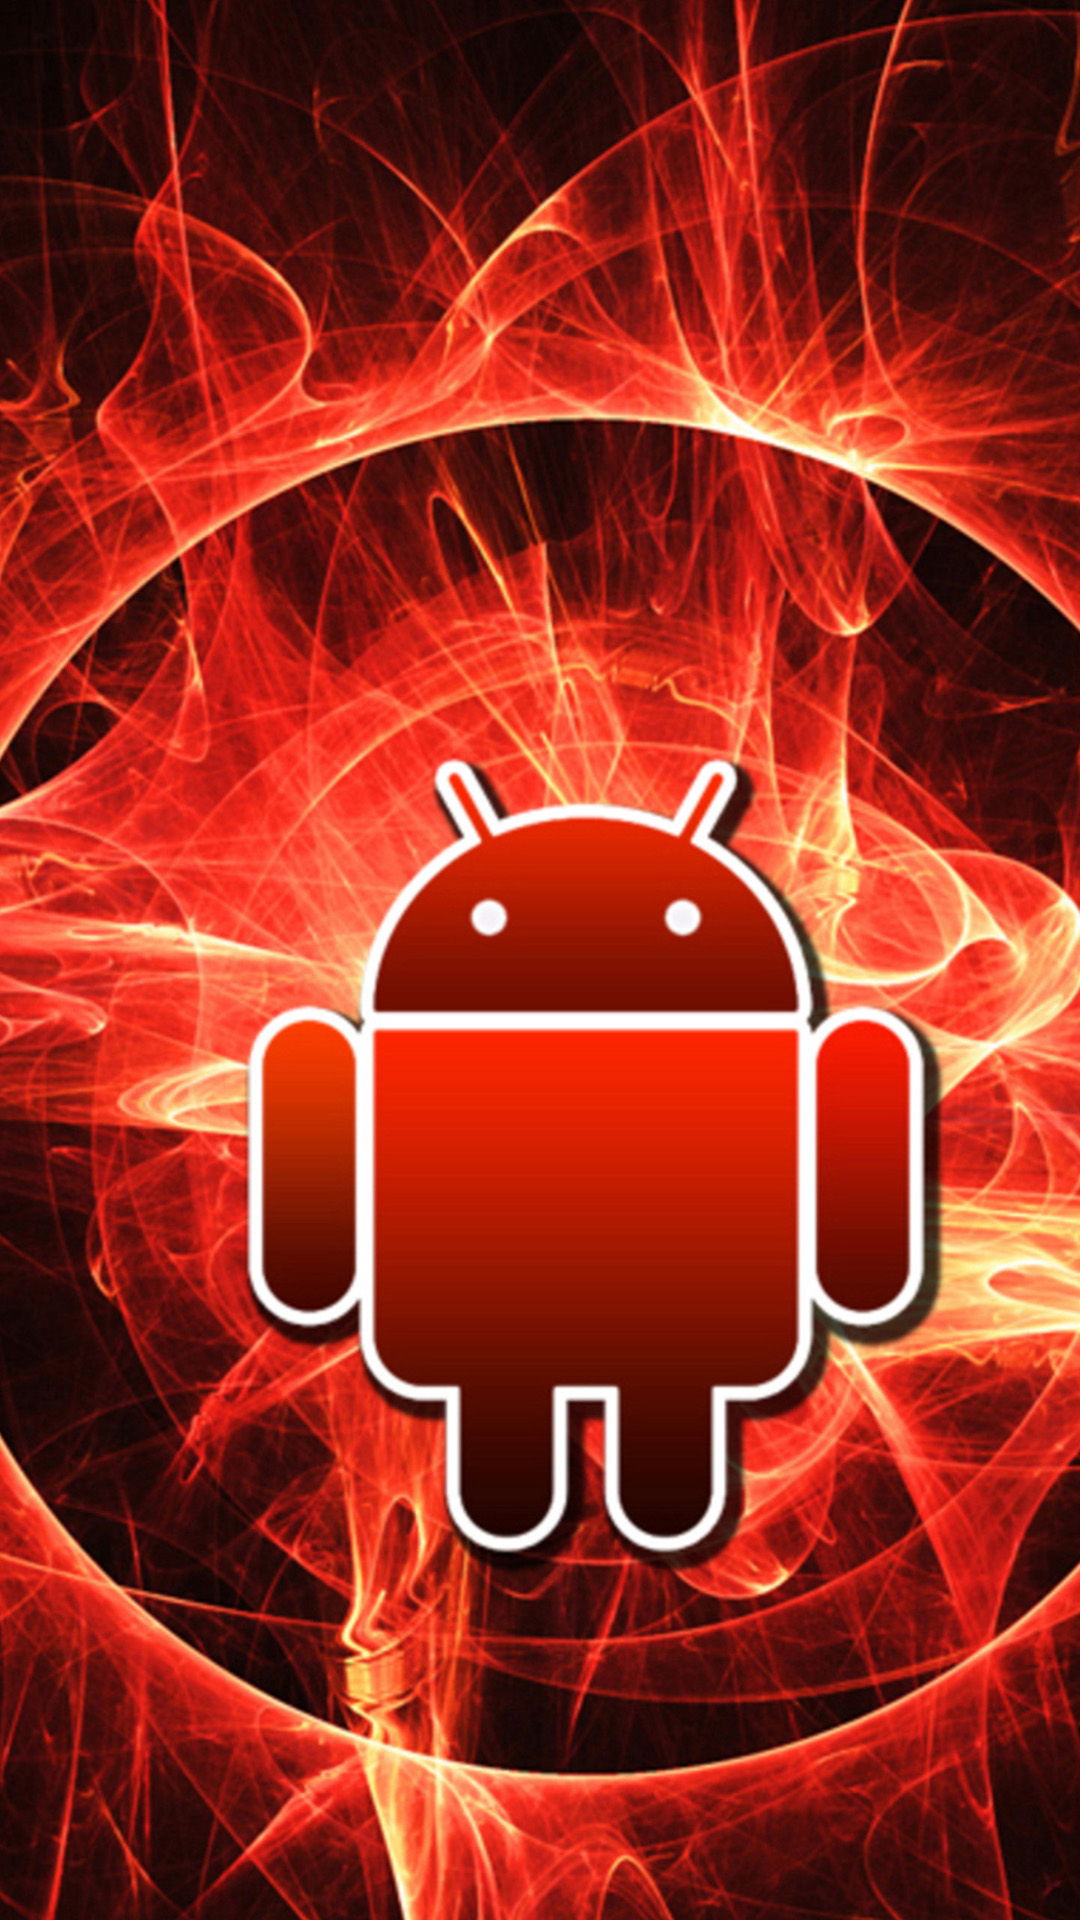 Android Fire Smartphone Wallpapers Hd Imagenes Hd De Android 1080x19 Wallpaper Teahub Io